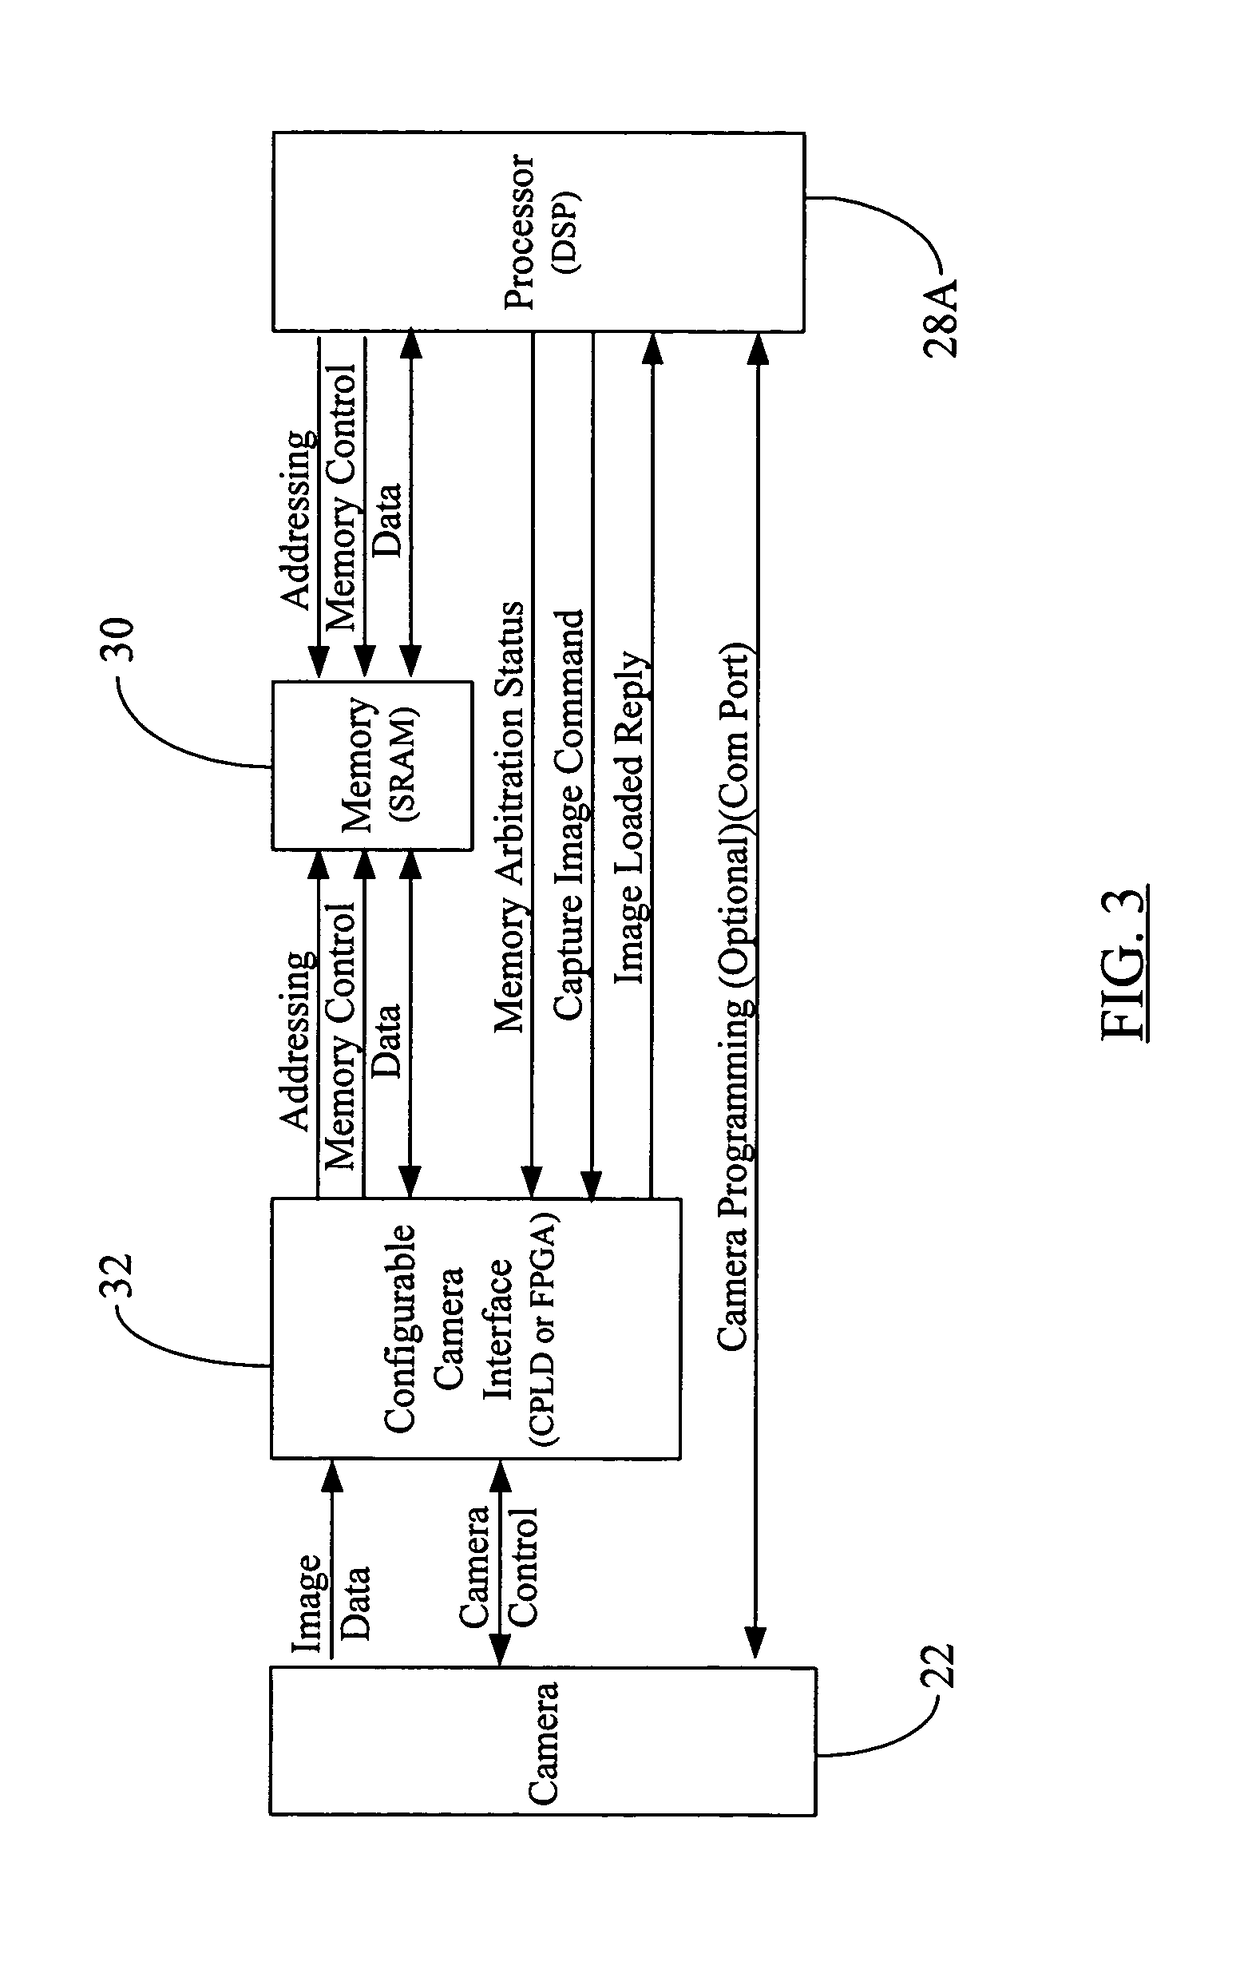 Embedded imaging and control system